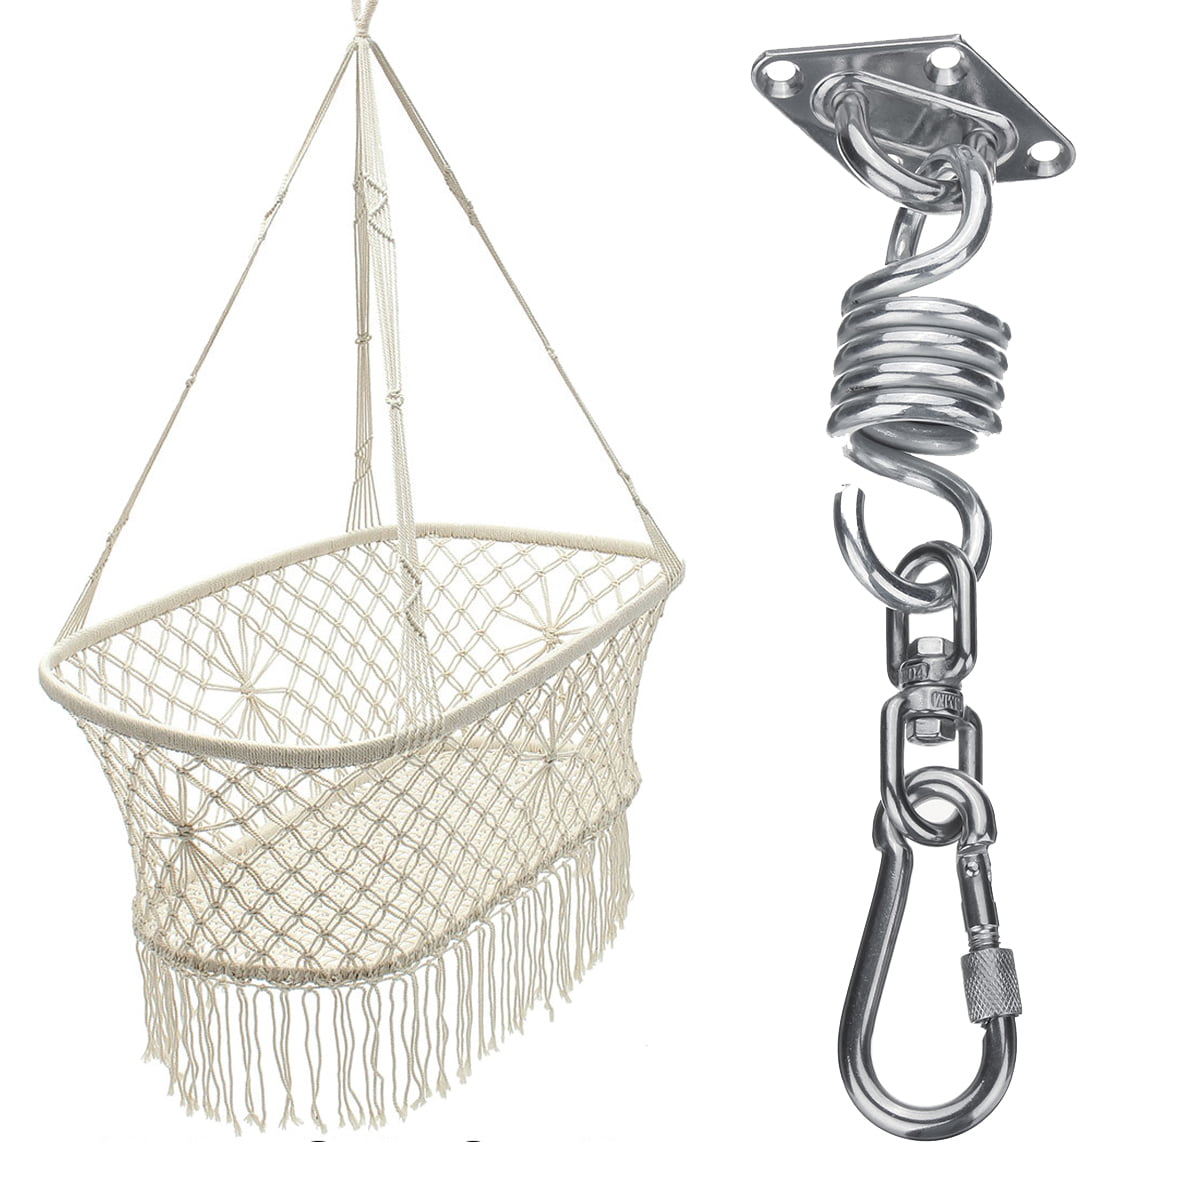 Details about   550LB Hammock Chair Hanging Kit Stainless Steel Spring Swivel Hook Ceiling Mount